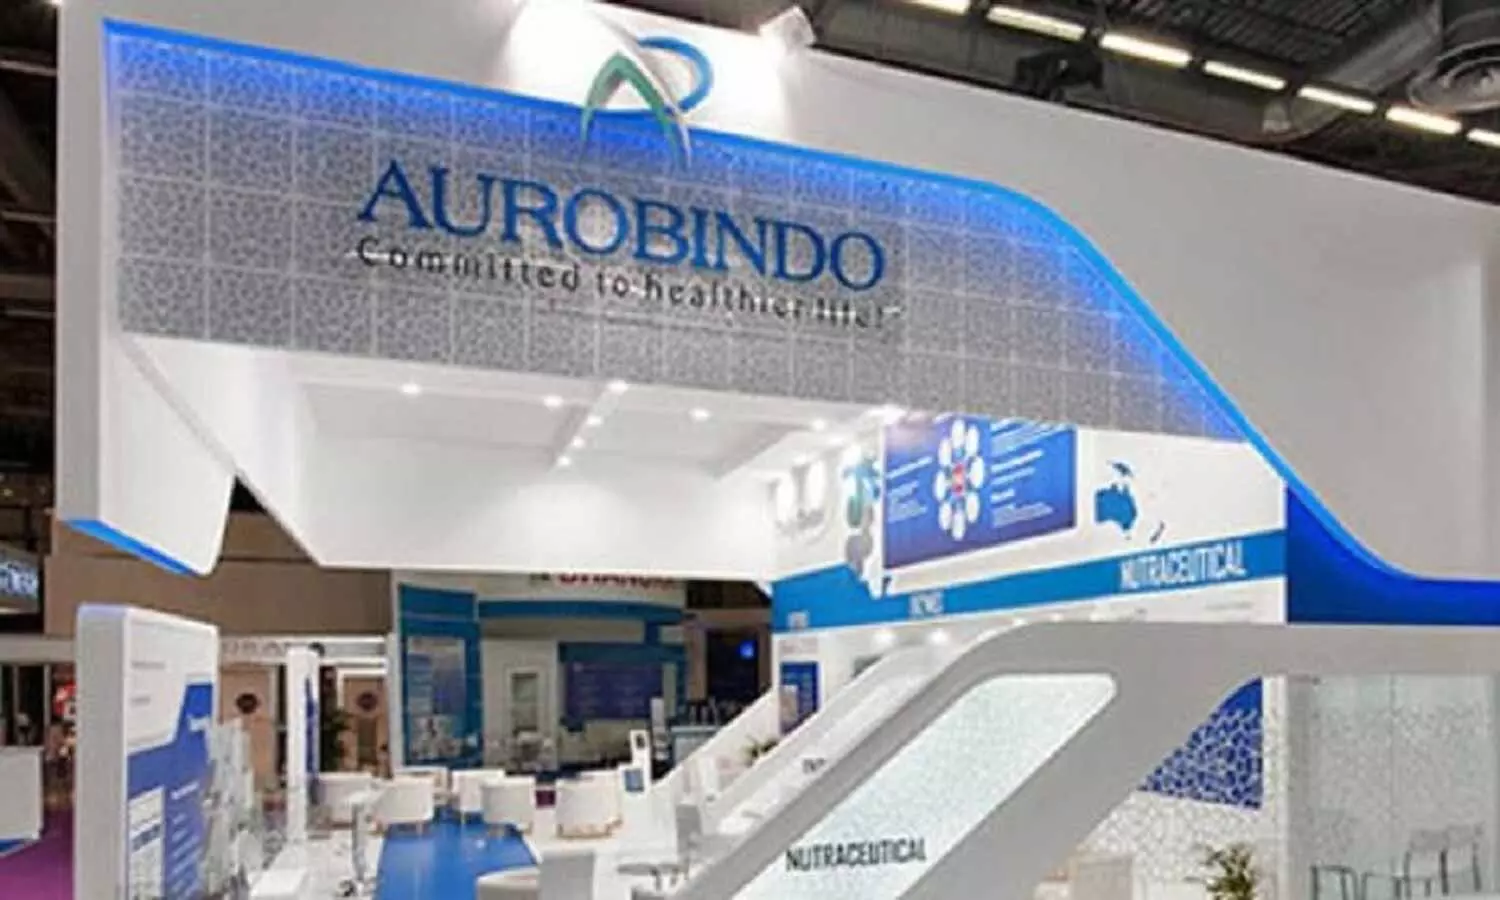 Aurobindo Pharma gets USFDA warning letter for Hyderabad facility over poor manufacturing practices